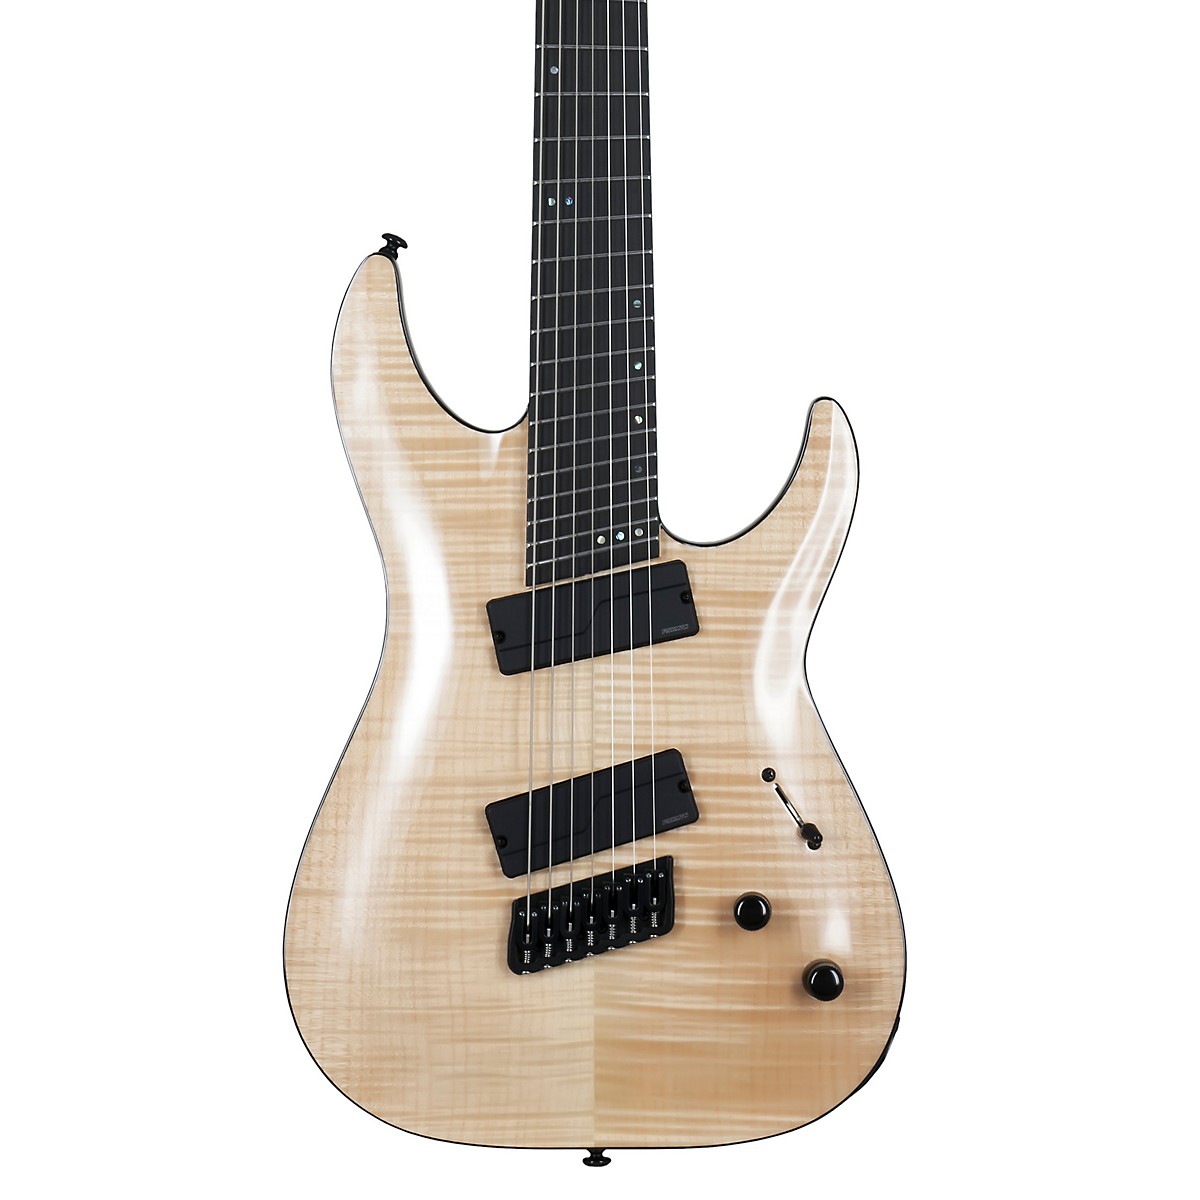 Schecter Guitar Research C 7 Ms Sls Elite 7 String Multi Scale Electric Guitar Gloss Natural Guitar Center